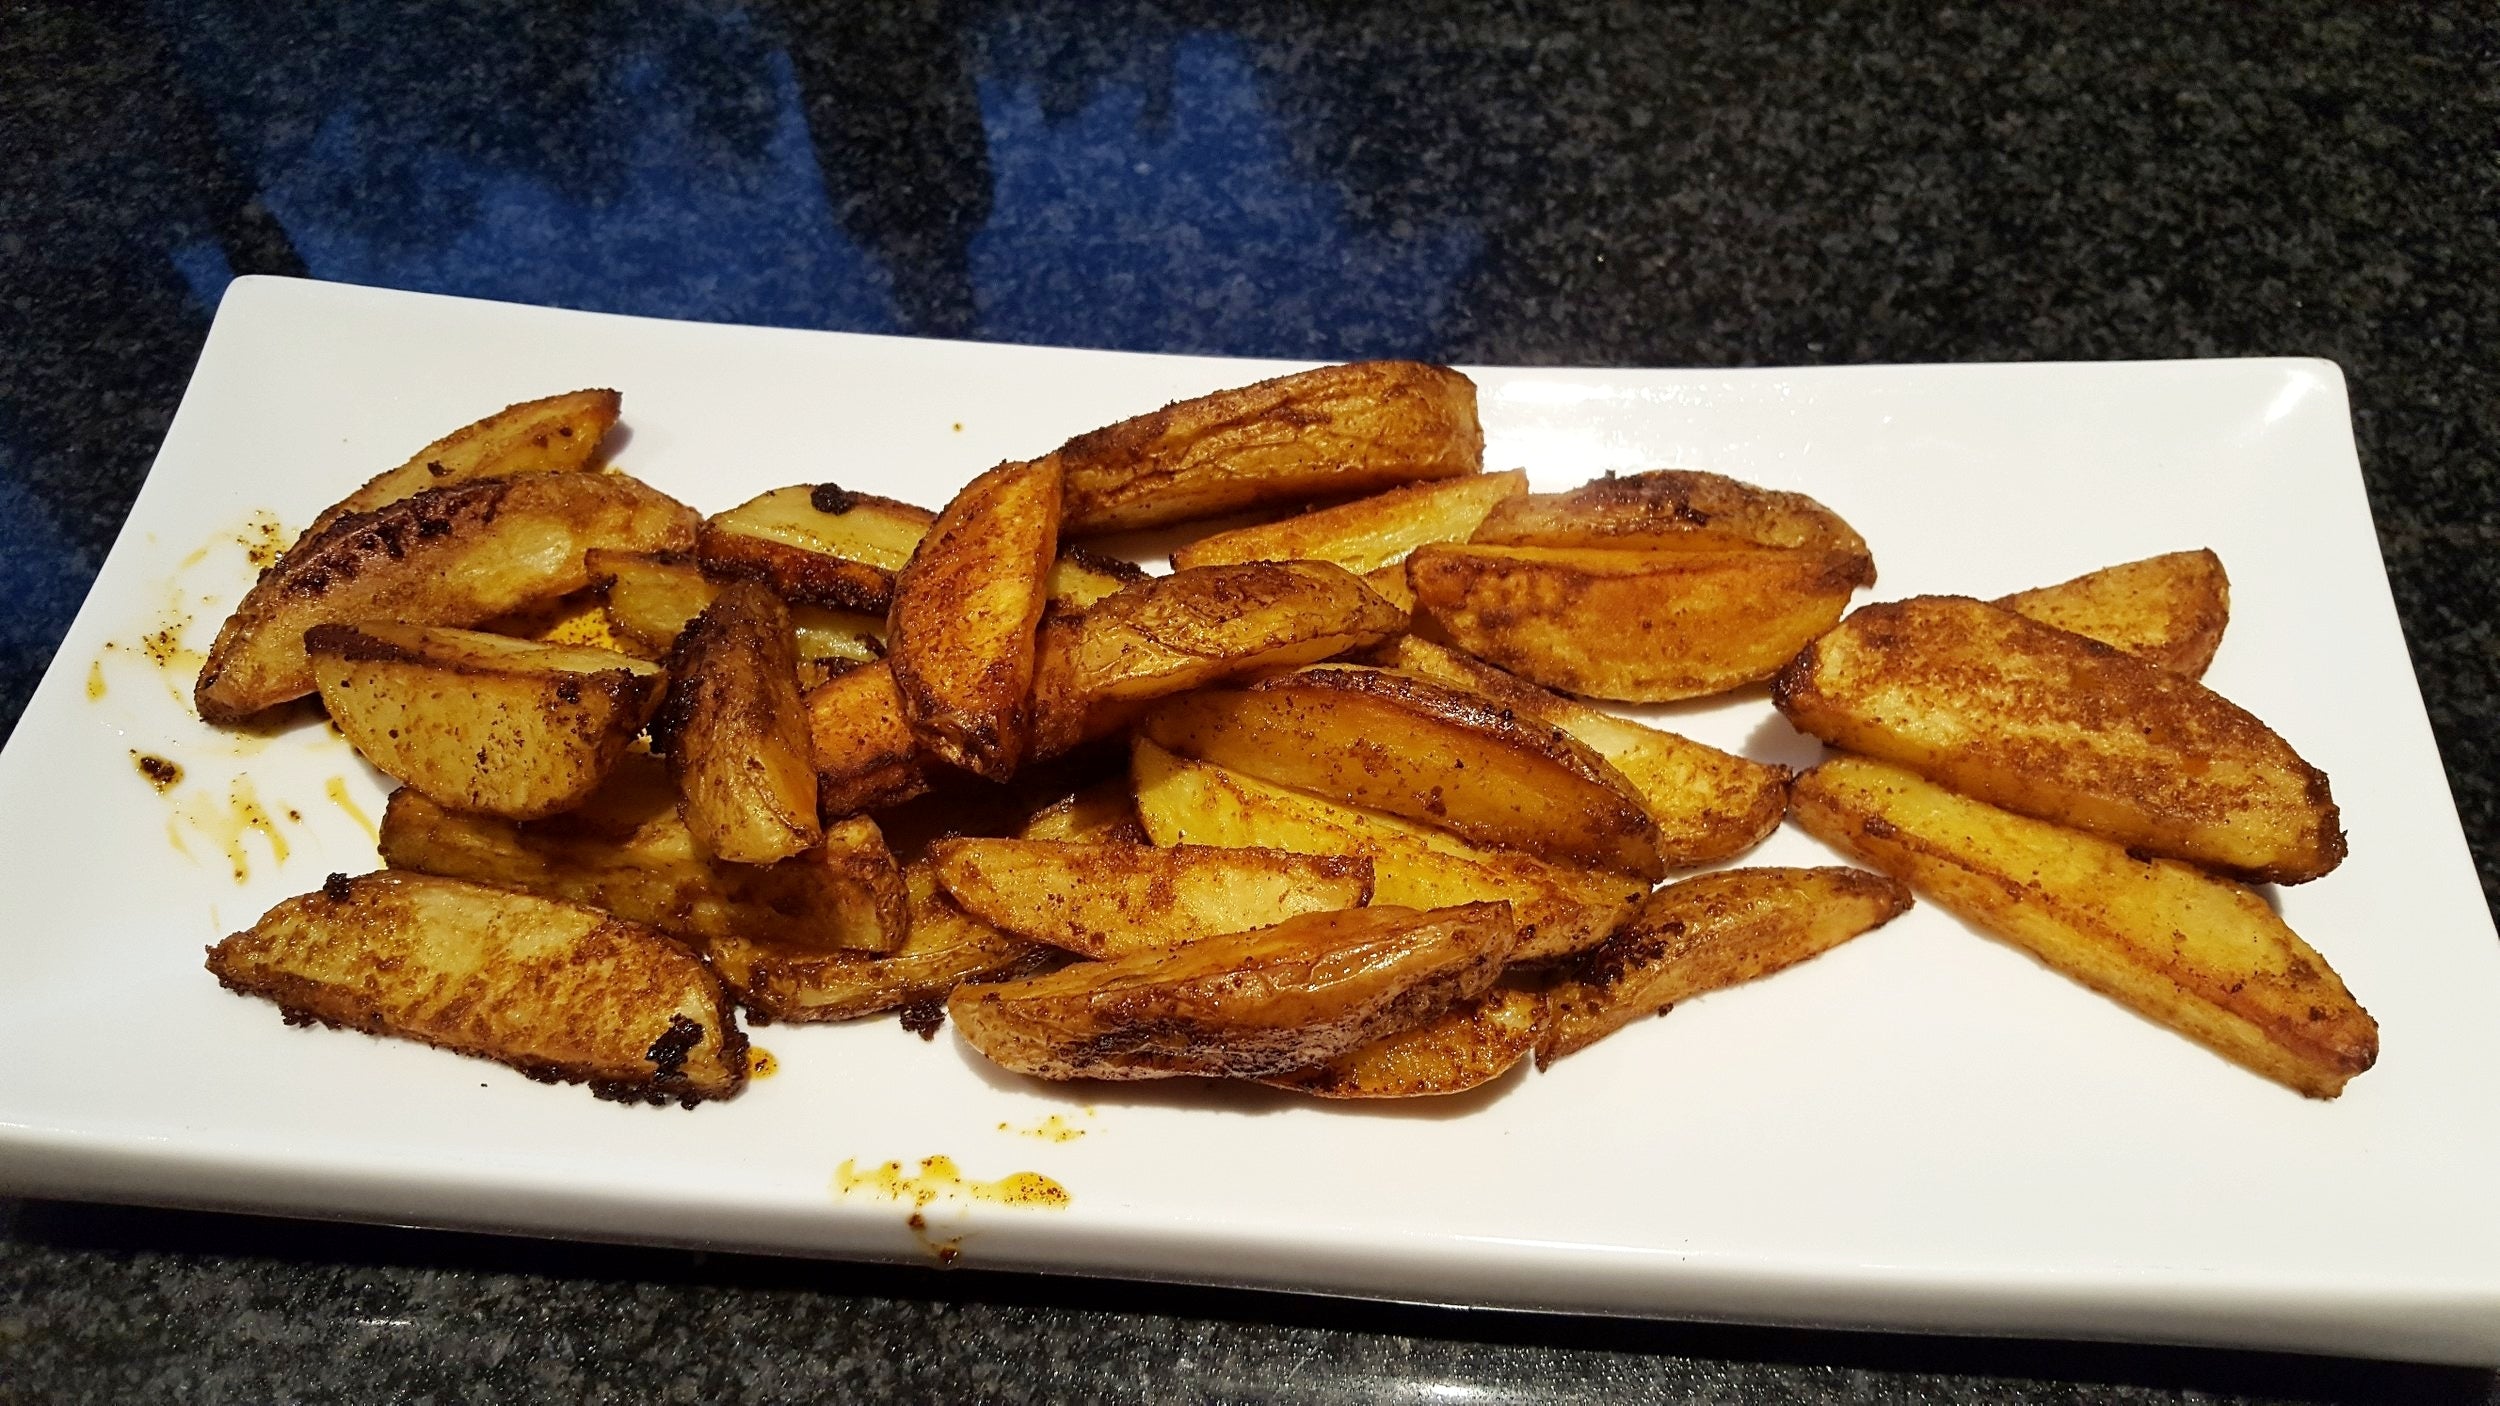  Roasted potatoes with Dr. Ayala's Magic Spice, a great way to make comfort food more nutritious! 